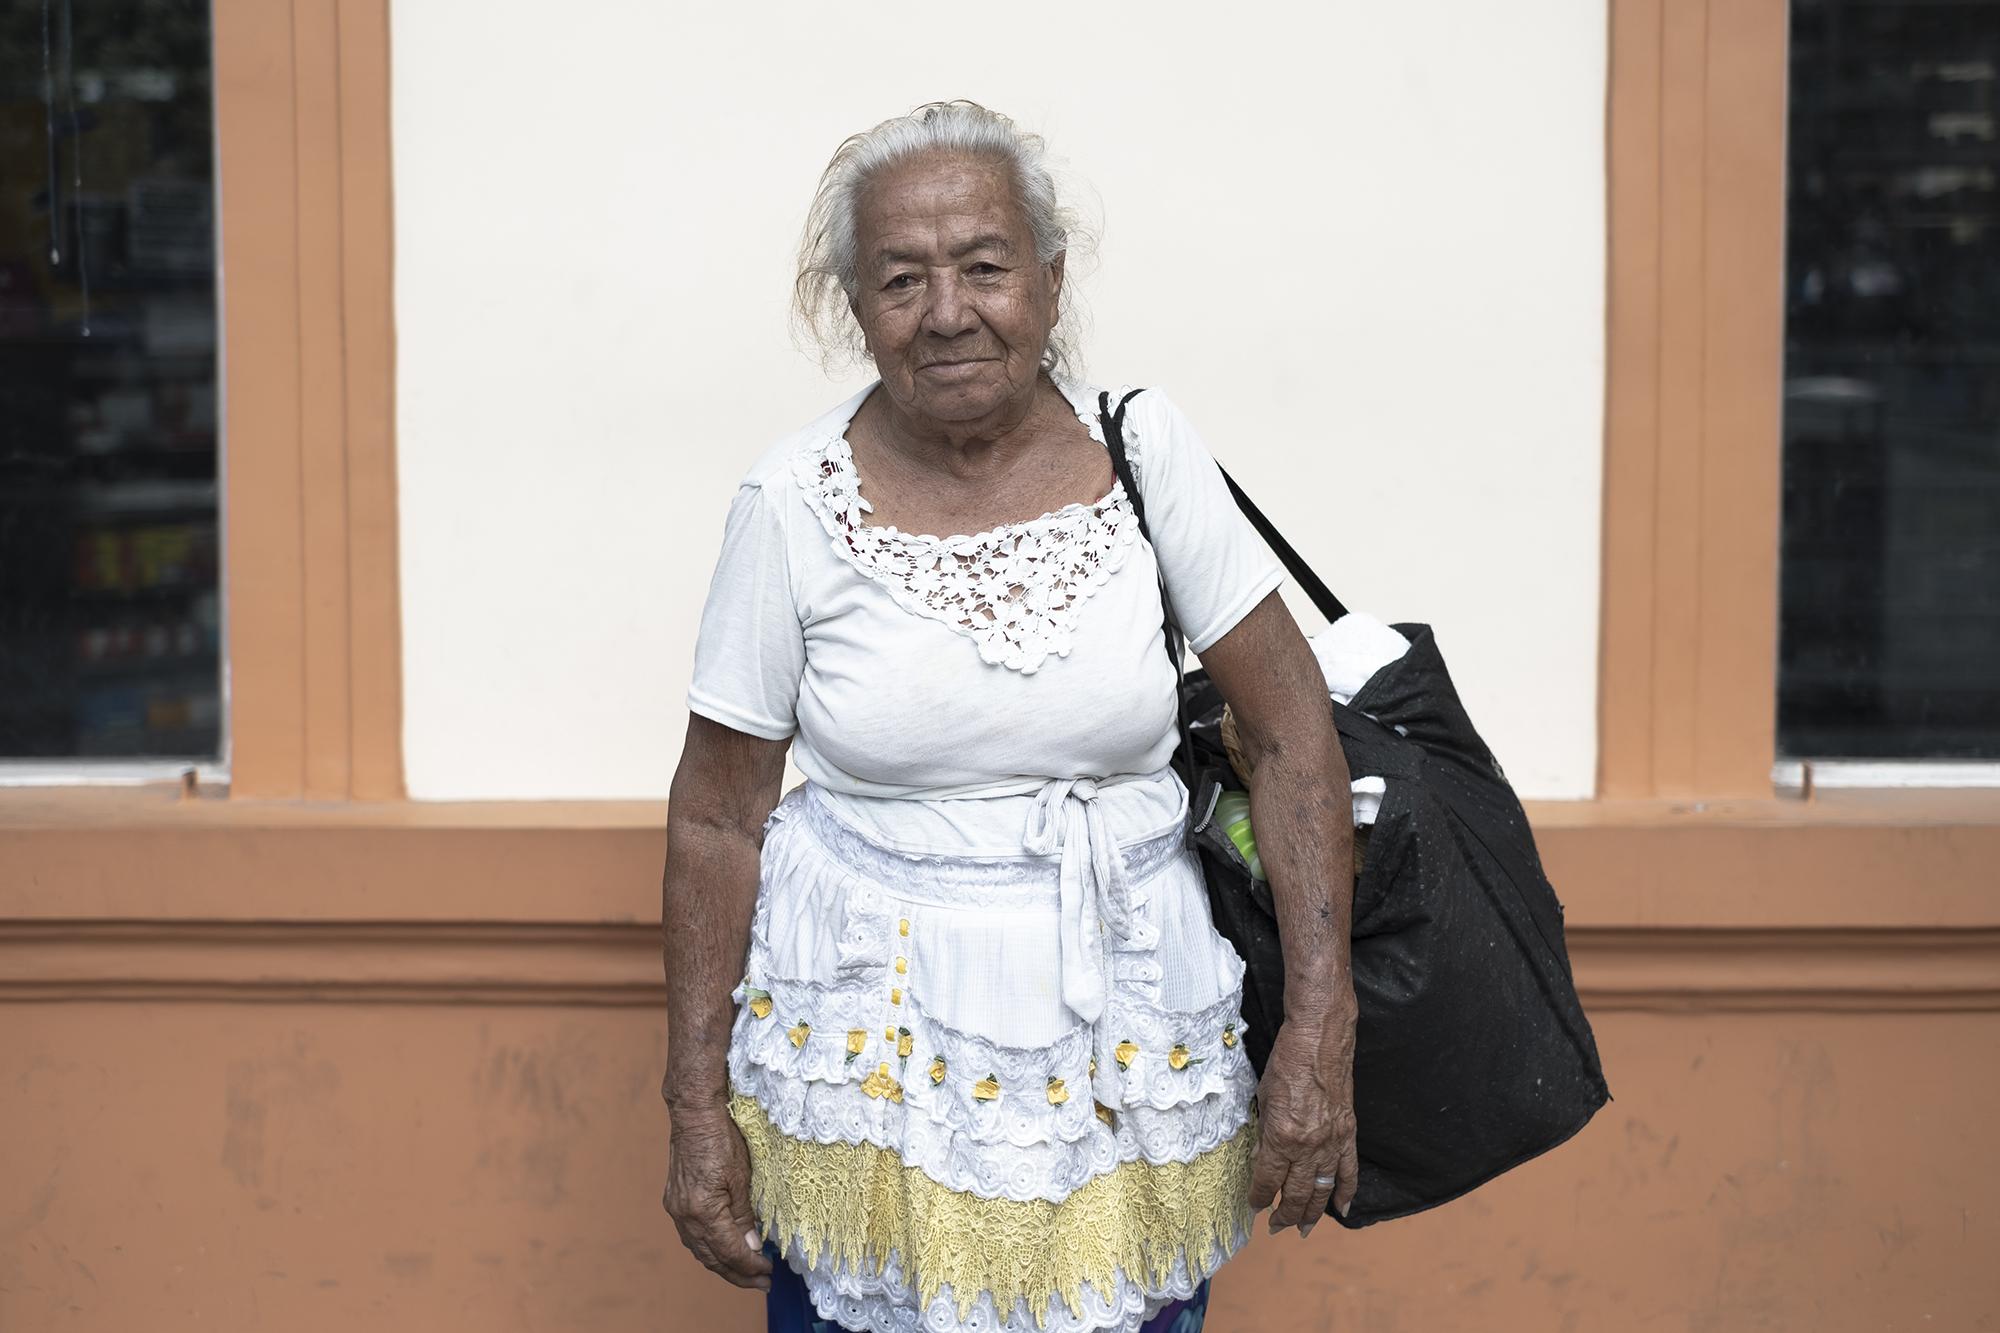 Blanca Flamenco, 73, lives in Mariona and sells sewing supplies throughout downtown San Salvador. She makes about $5 every day, covering her basic needs. “I won’t stay home. I live alone because my children are dead and nobody can take care of me,” she said. “Let the people with money stay home. When you’re poor, you have to go to work.”